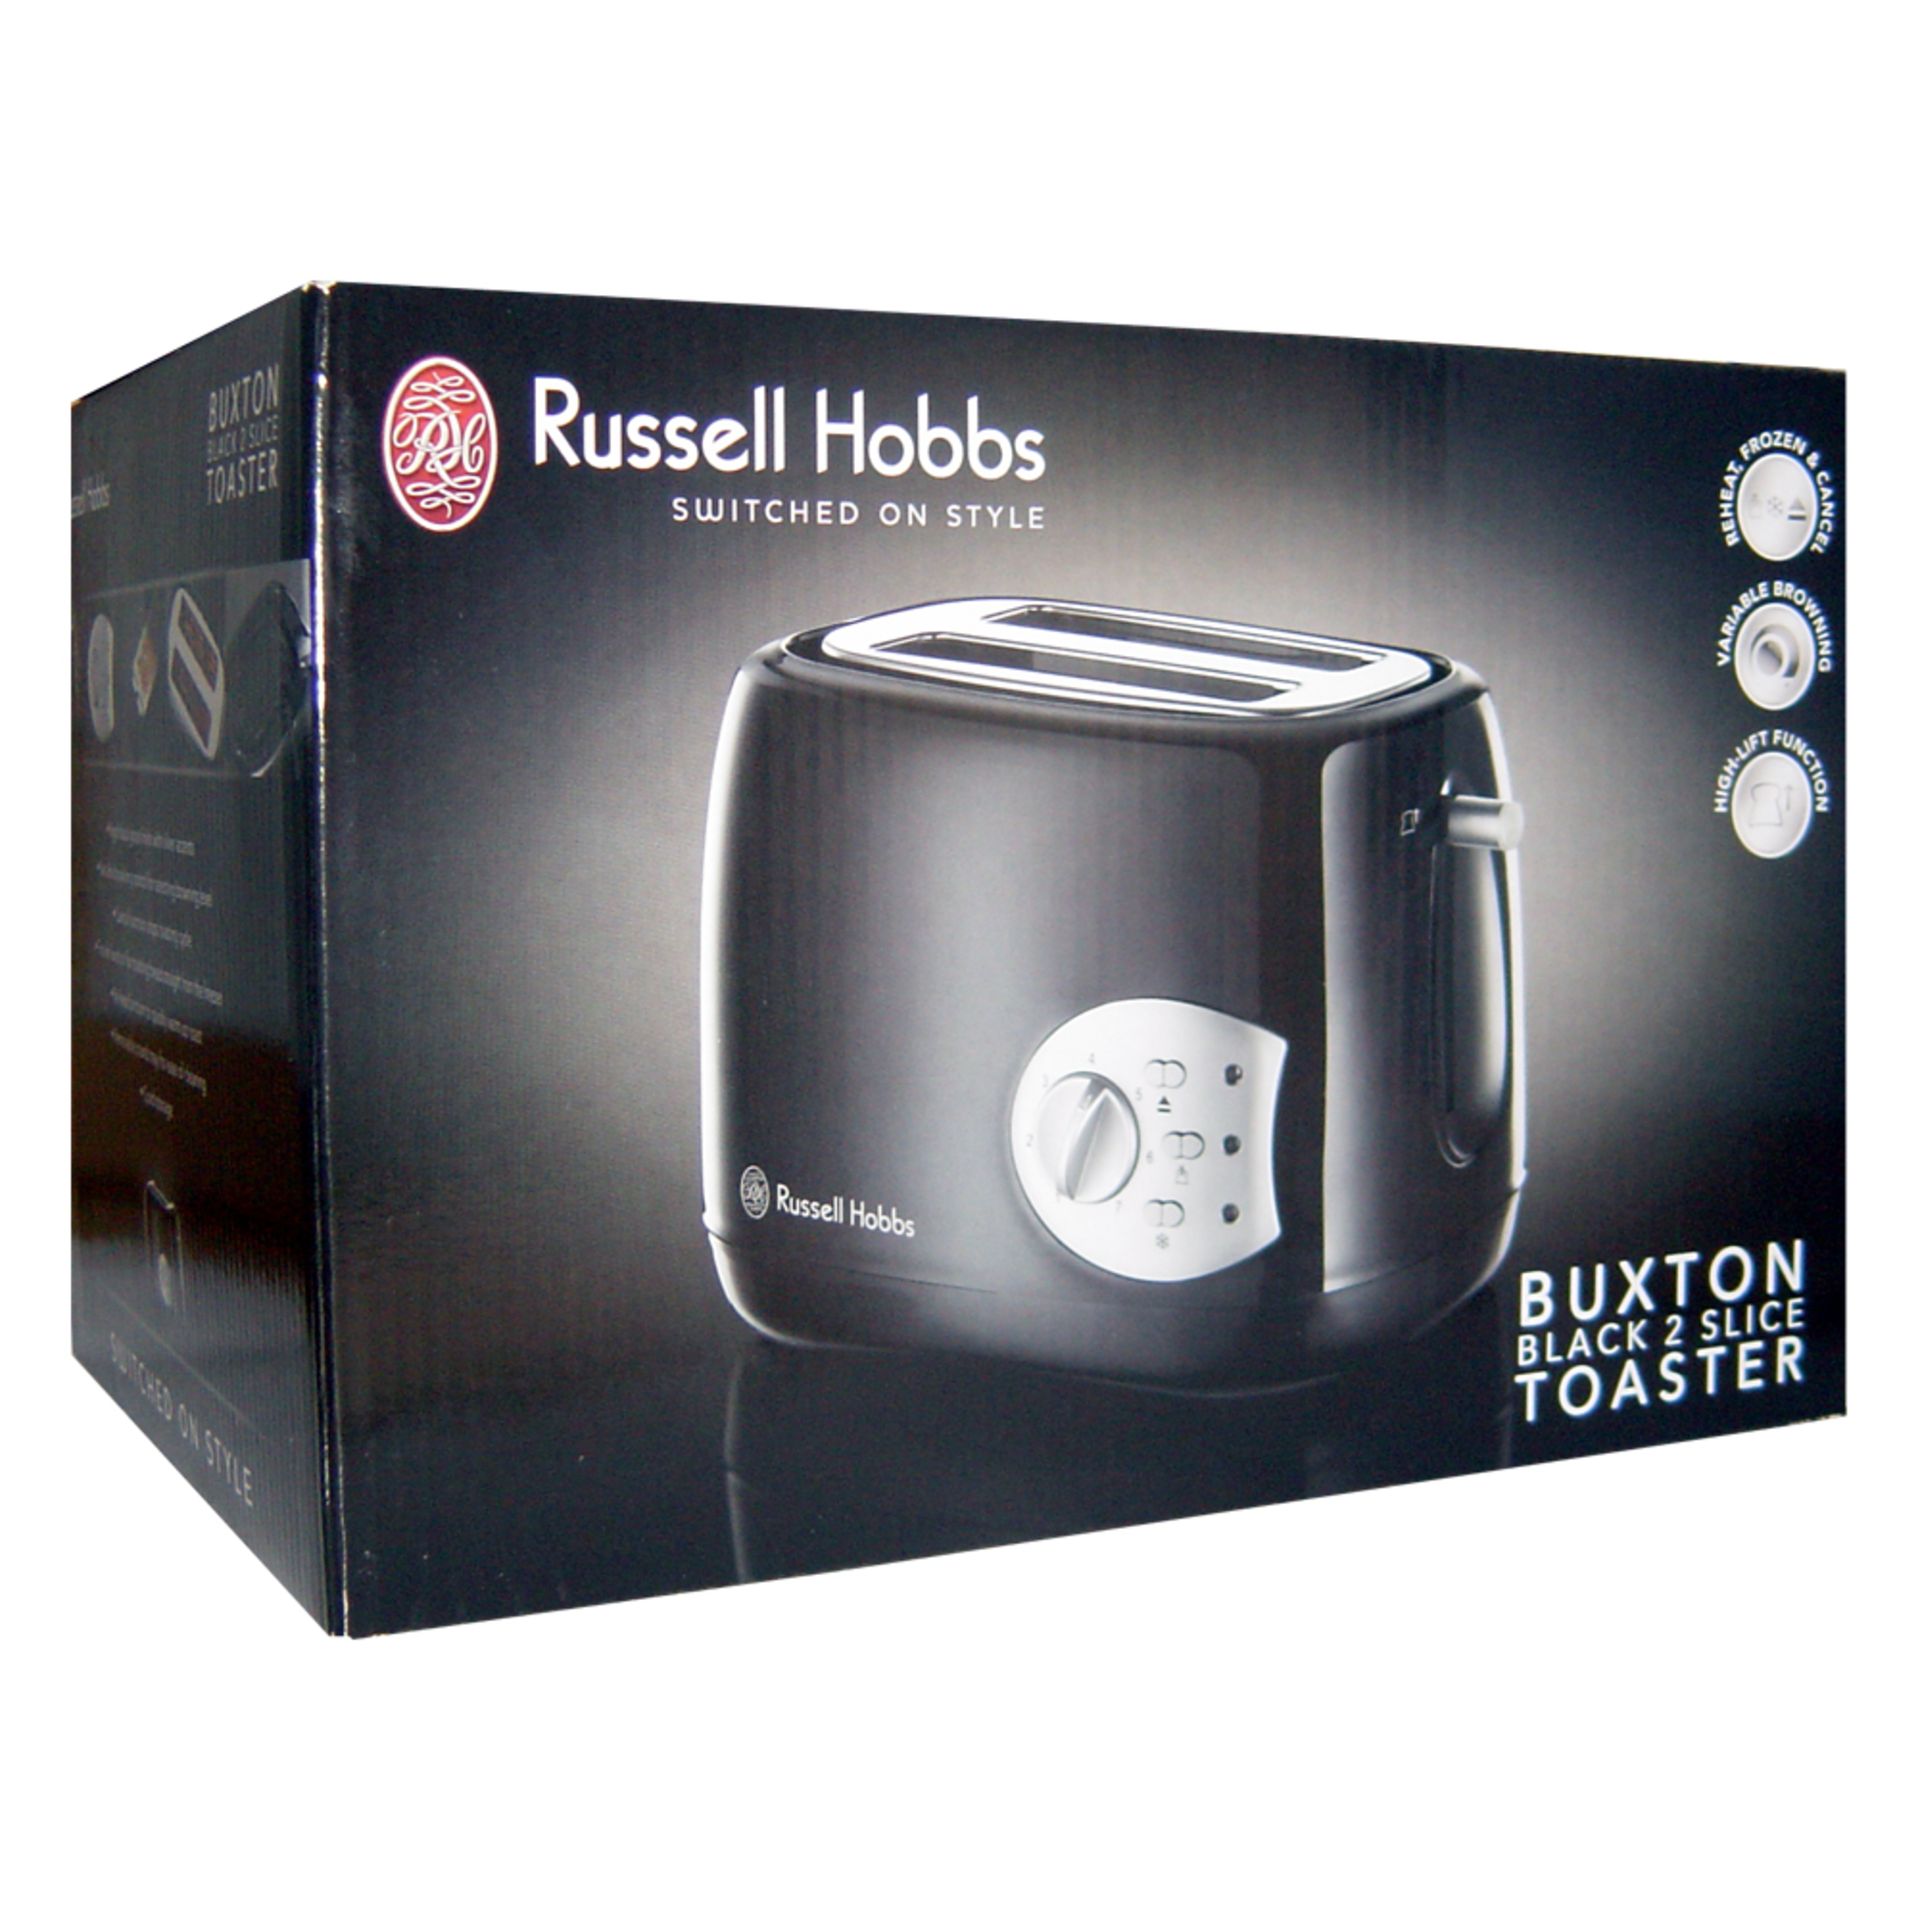 V *TRADE QTY* Brand New Russell Hobbs Two Slice Toaster - With Reheat/Frozen/Cancel Features - - Image 2 of 3